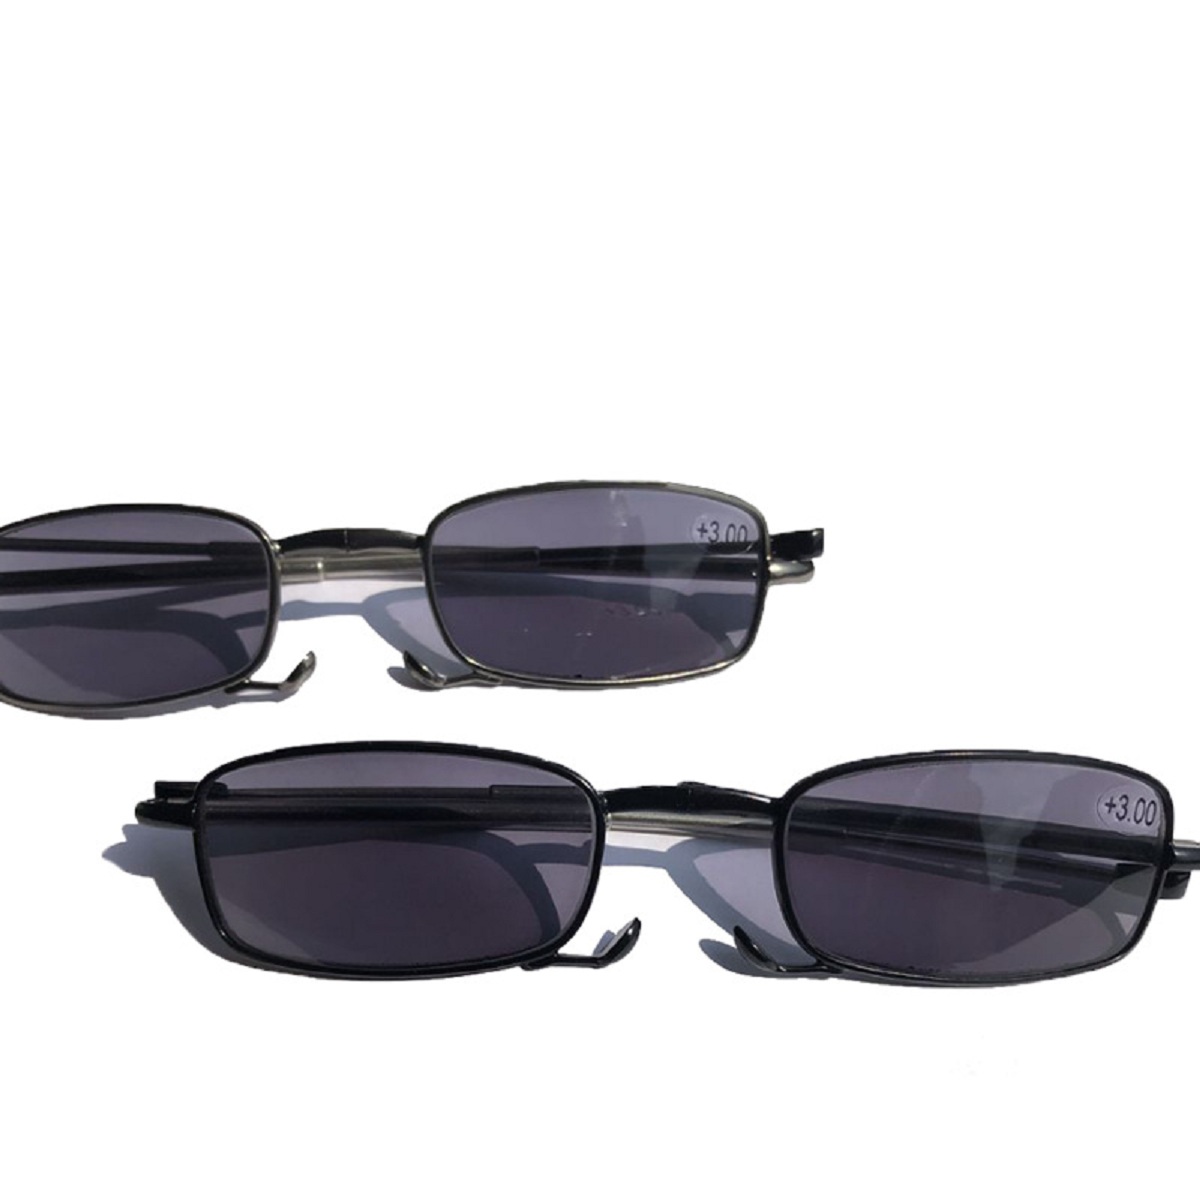 Folding-Discolored-Presbyopic-Glasses-for-Men-and-Women-with-UV-resistant-Comfortable-Metal-Presbyop-1568118-6